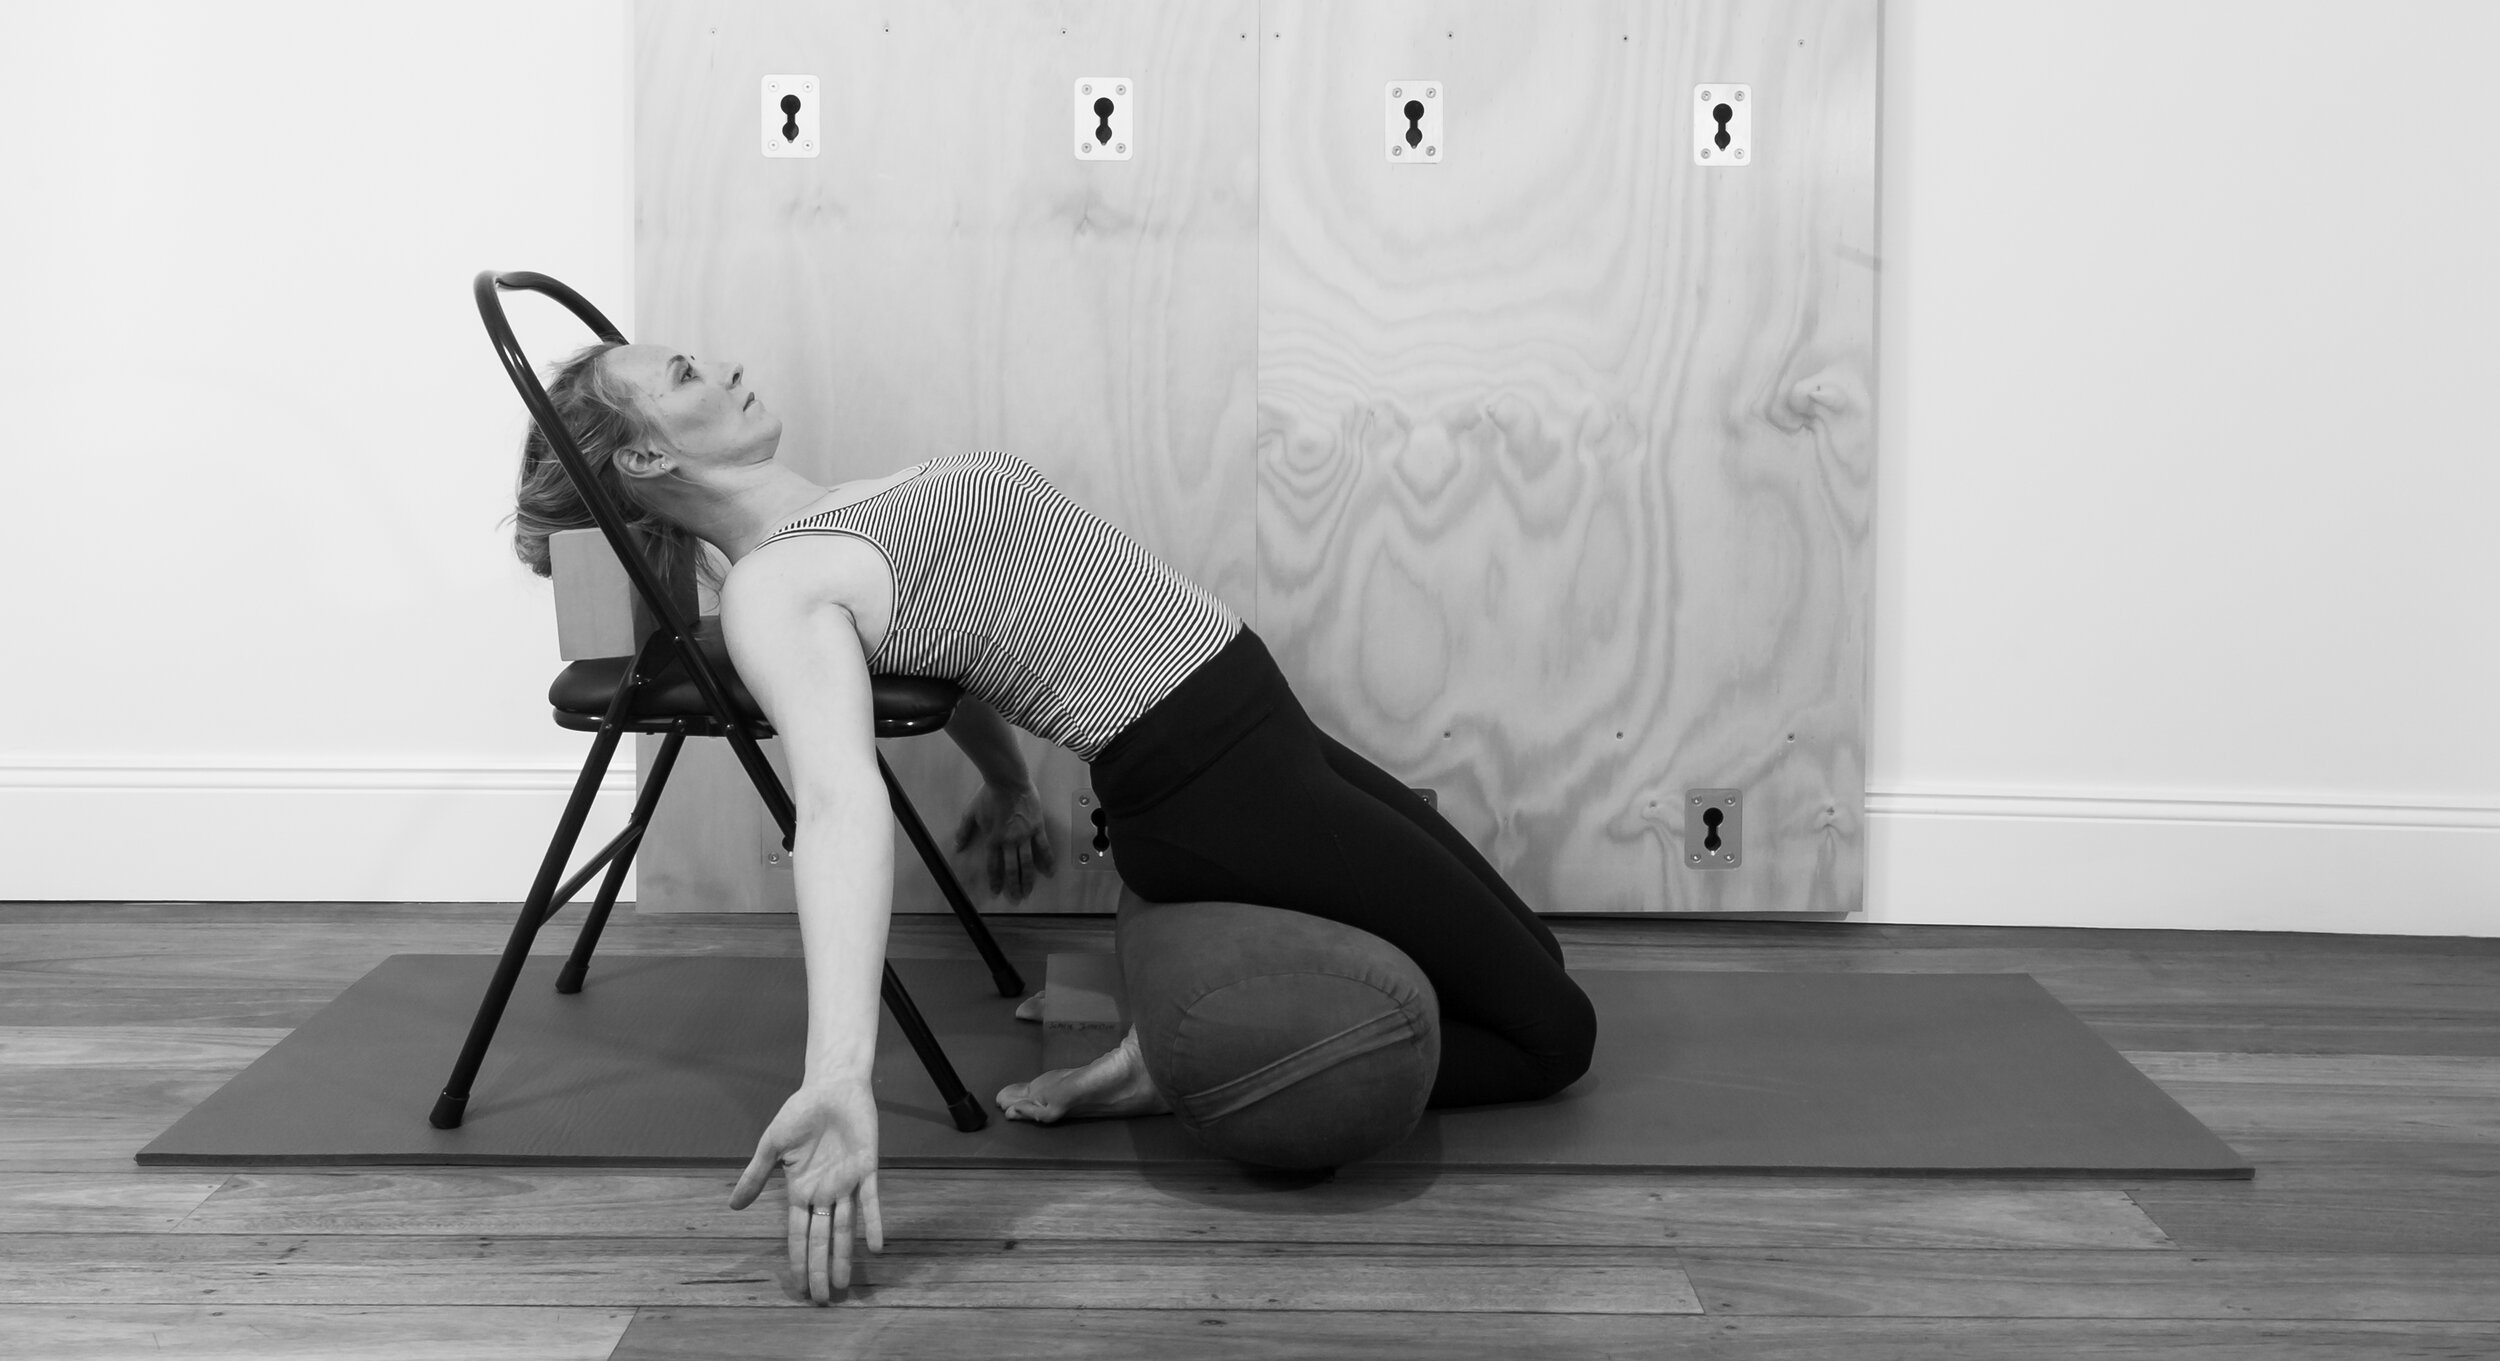  Variation using bolster behind knees and chair for spinal support 